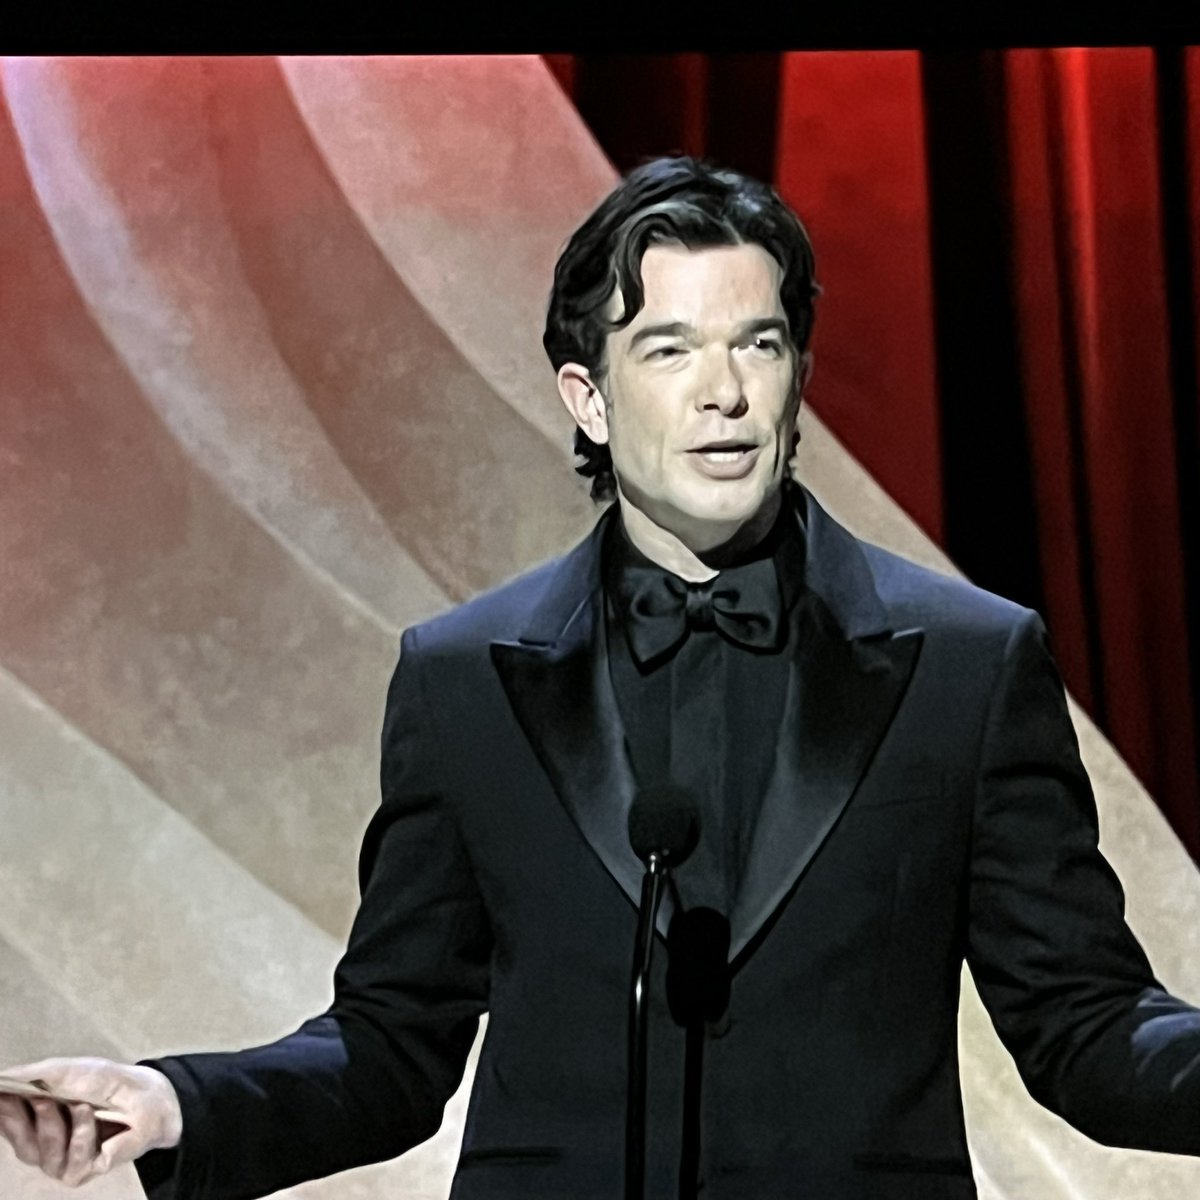 That’s my Plastic Man right there
#Oscars
#JohnMulaney